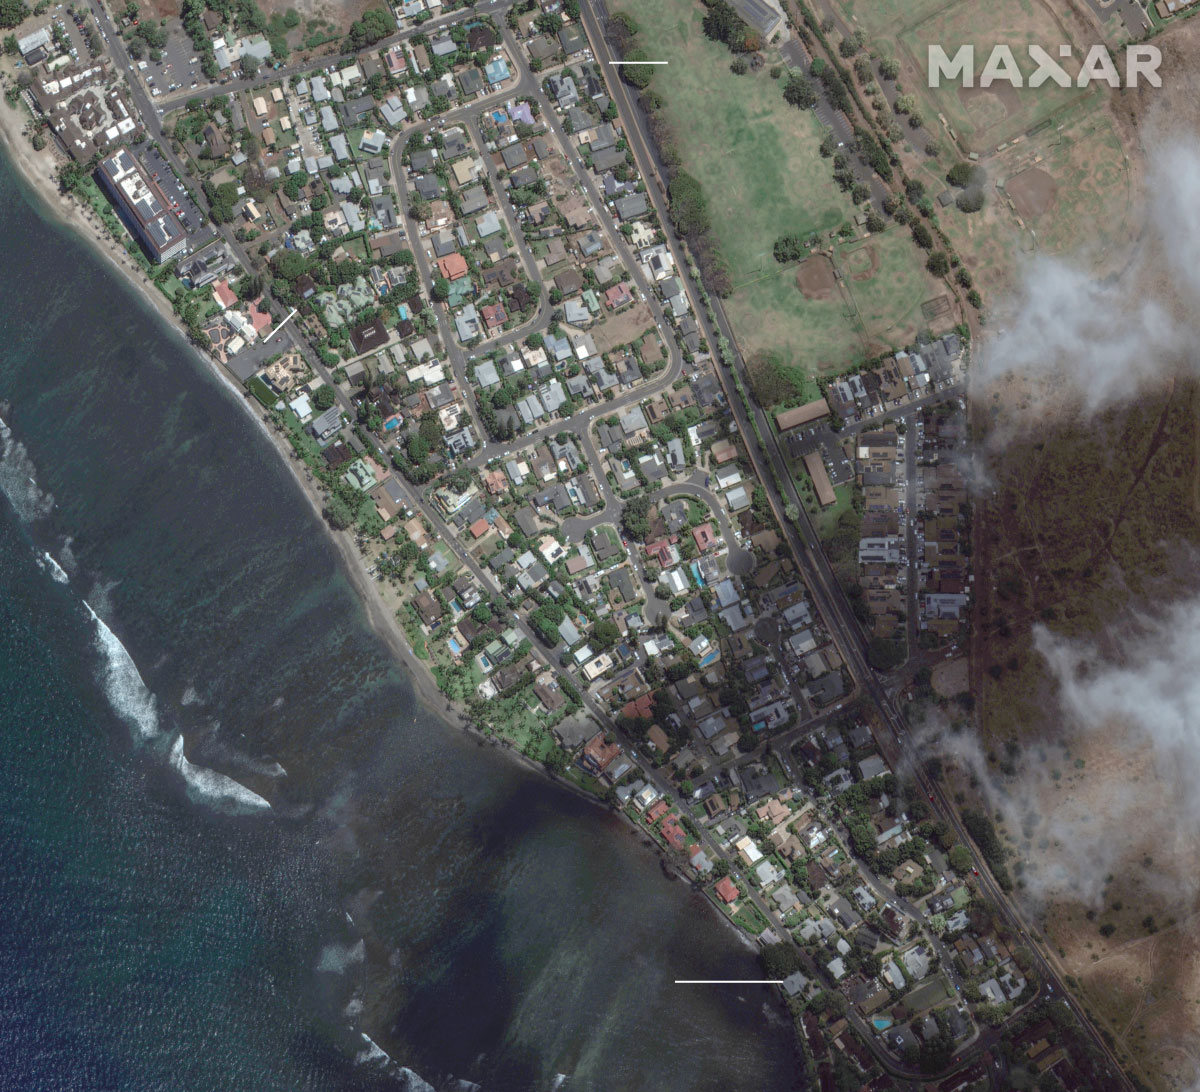 An annotated satellite image from June 25 shows the southern area of Lahaina before the fire.